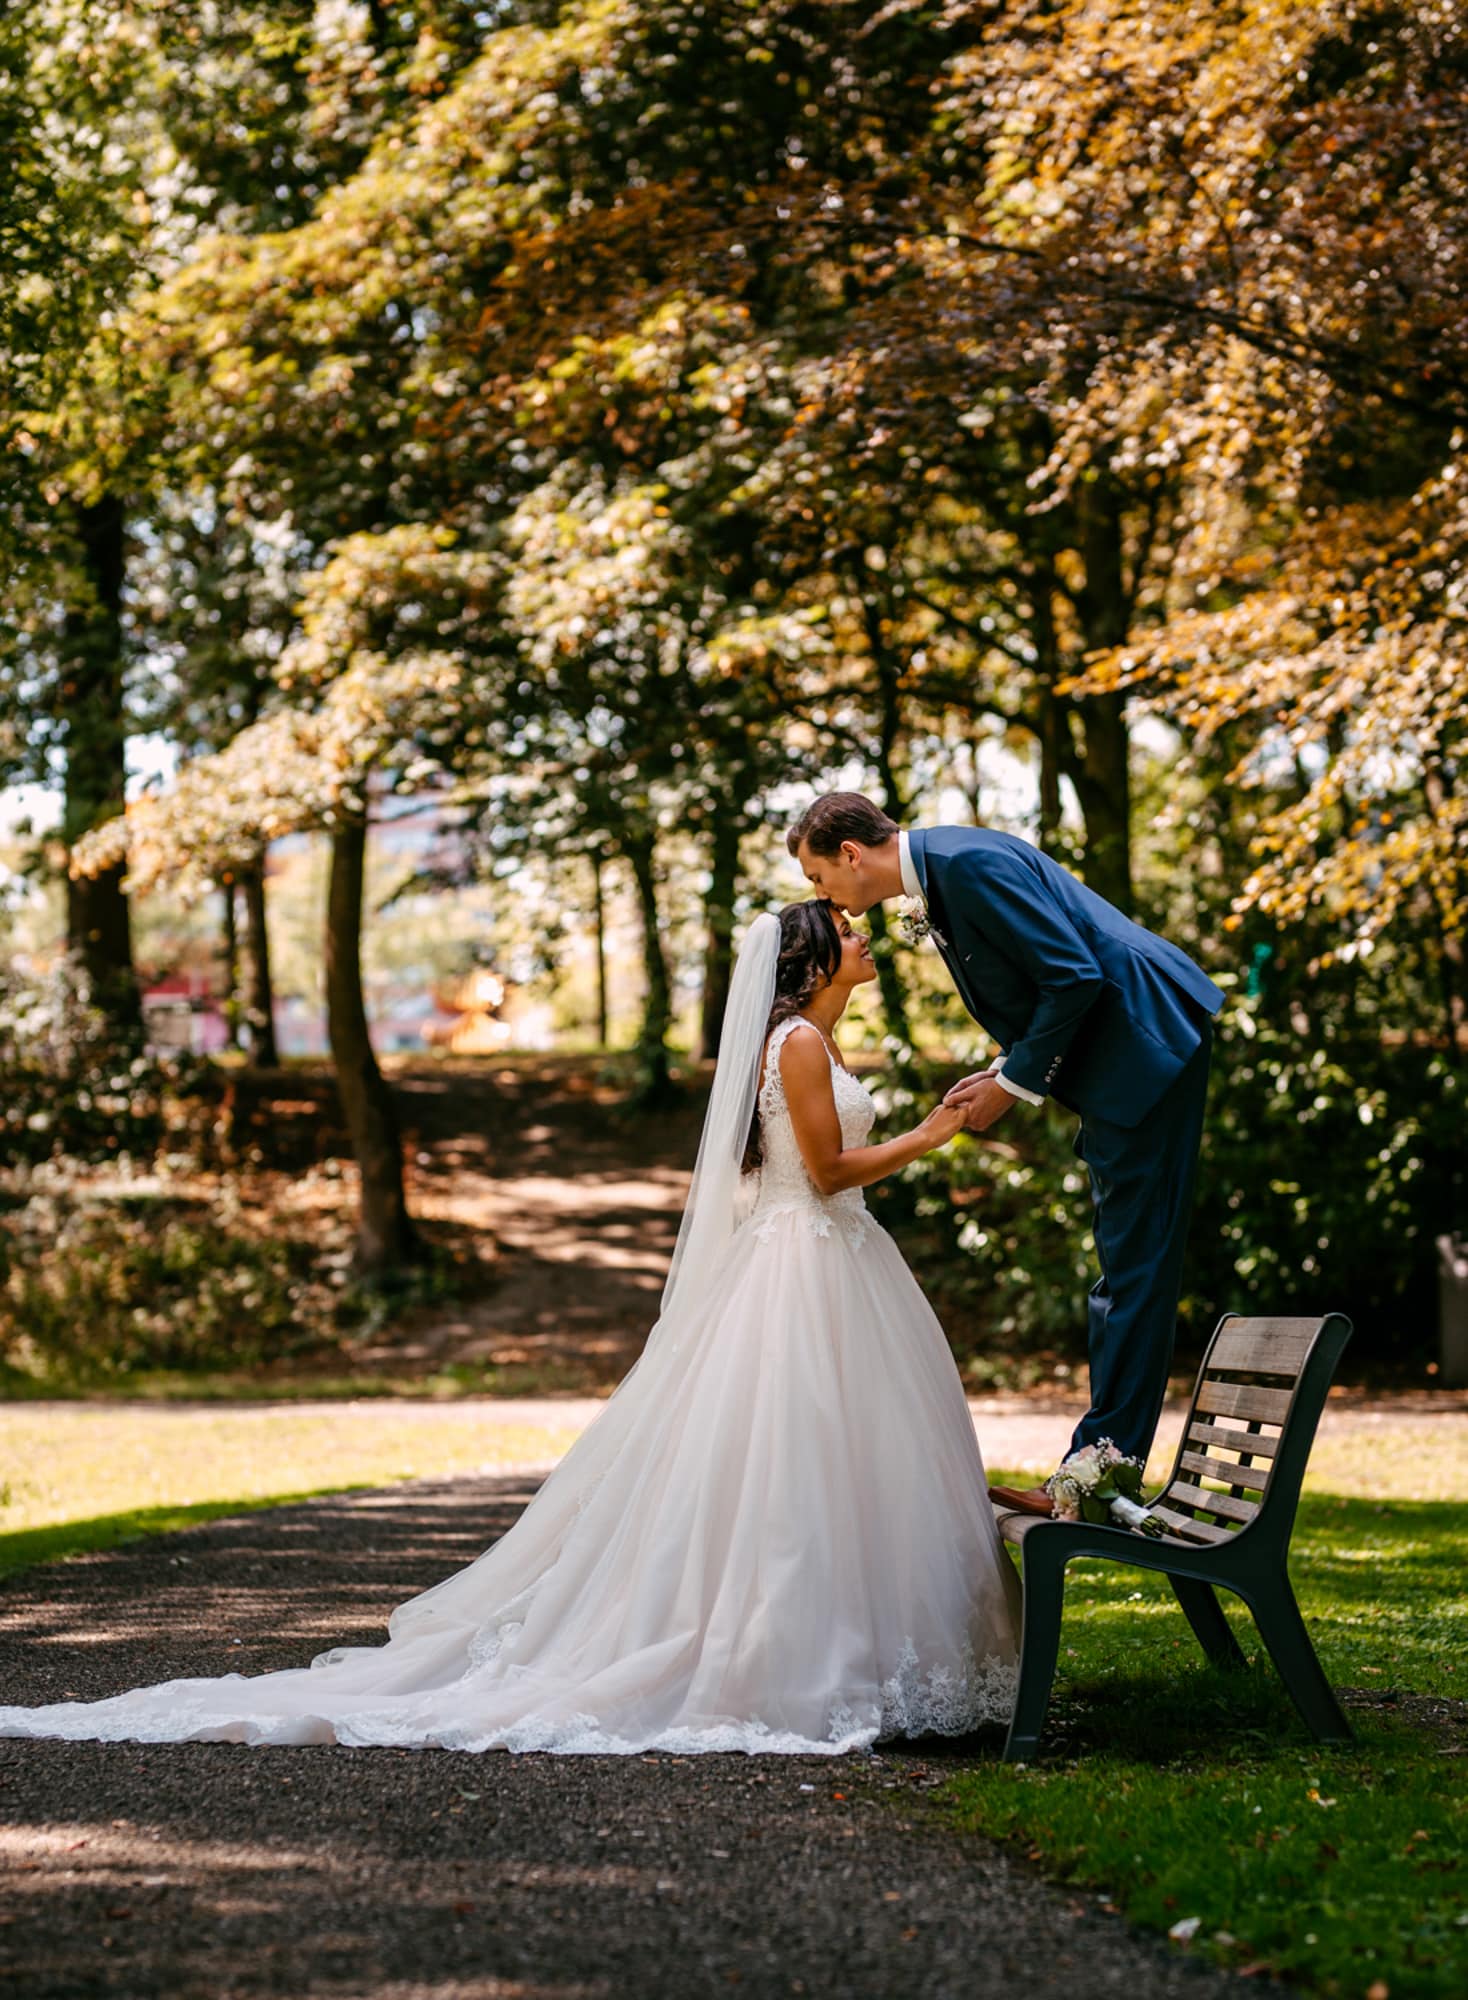 A bride and groom share a romantic kiss in Rotterdam's picturesque park.